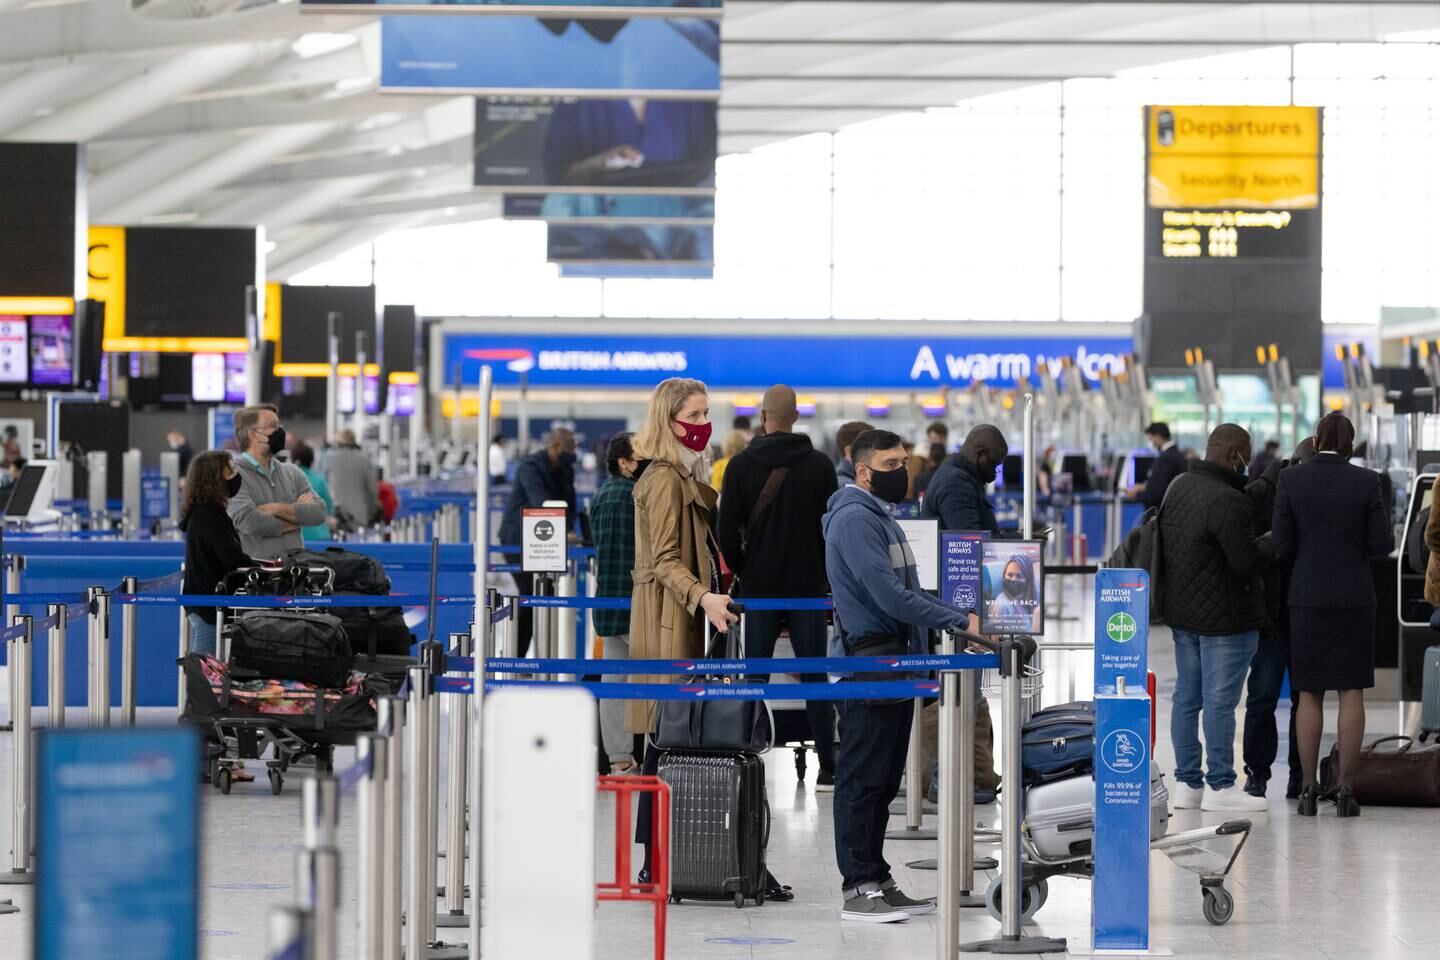 Heathrow is hoping for a strong summer season to bounce back from the Covid-19 pandemic. Photographer: Jason Alden/Bloomberg via Getty Images